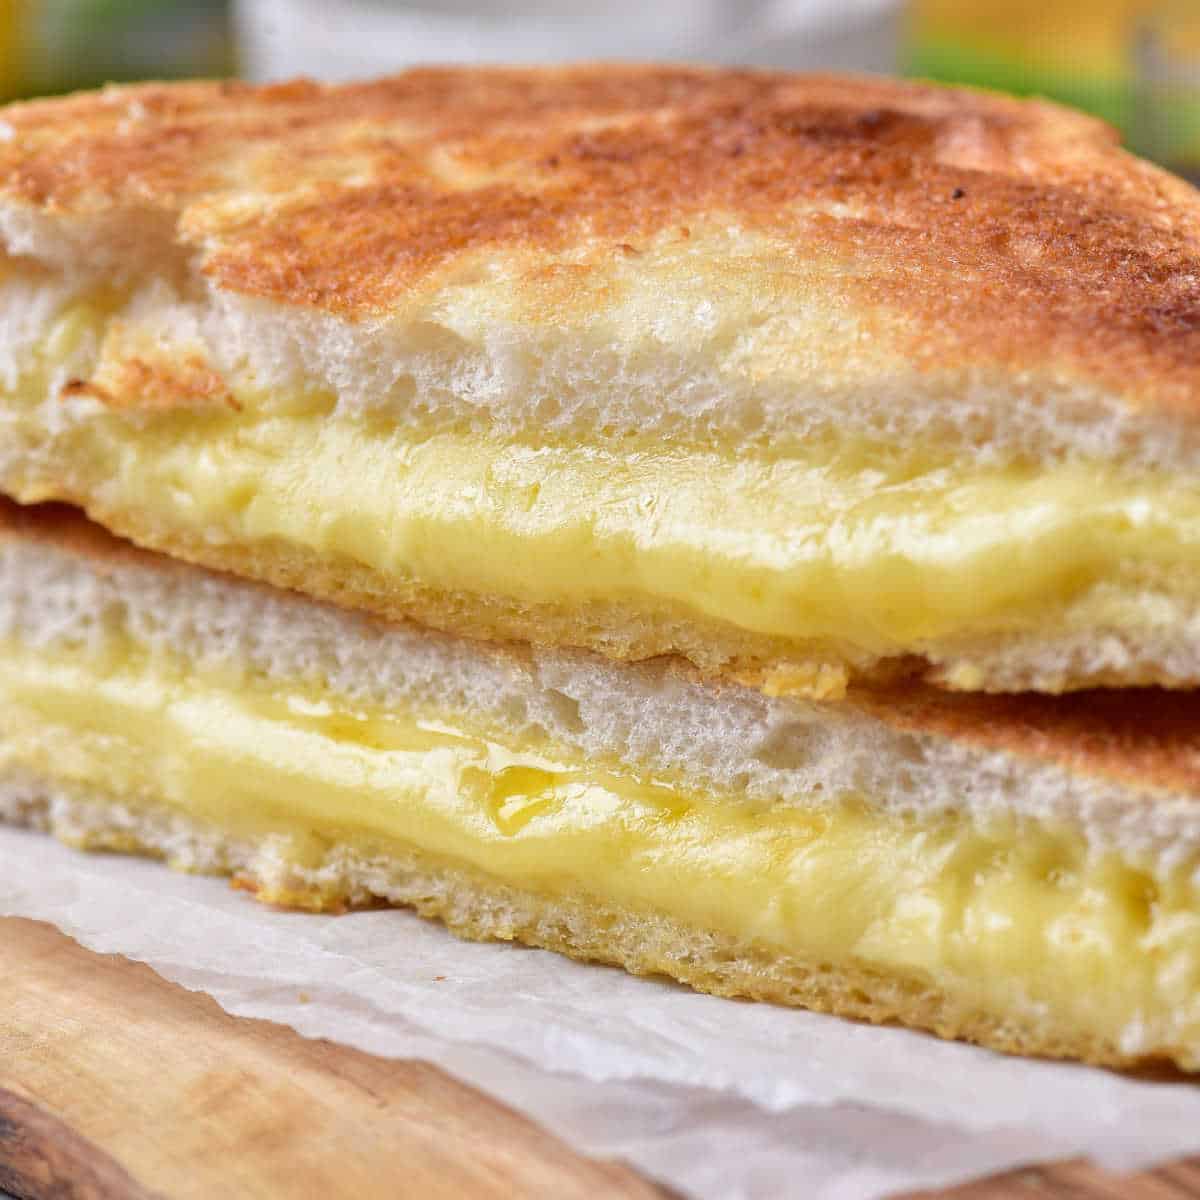 A close up of the melted cheese in the center of a air fryer grilled cheese sandwich.